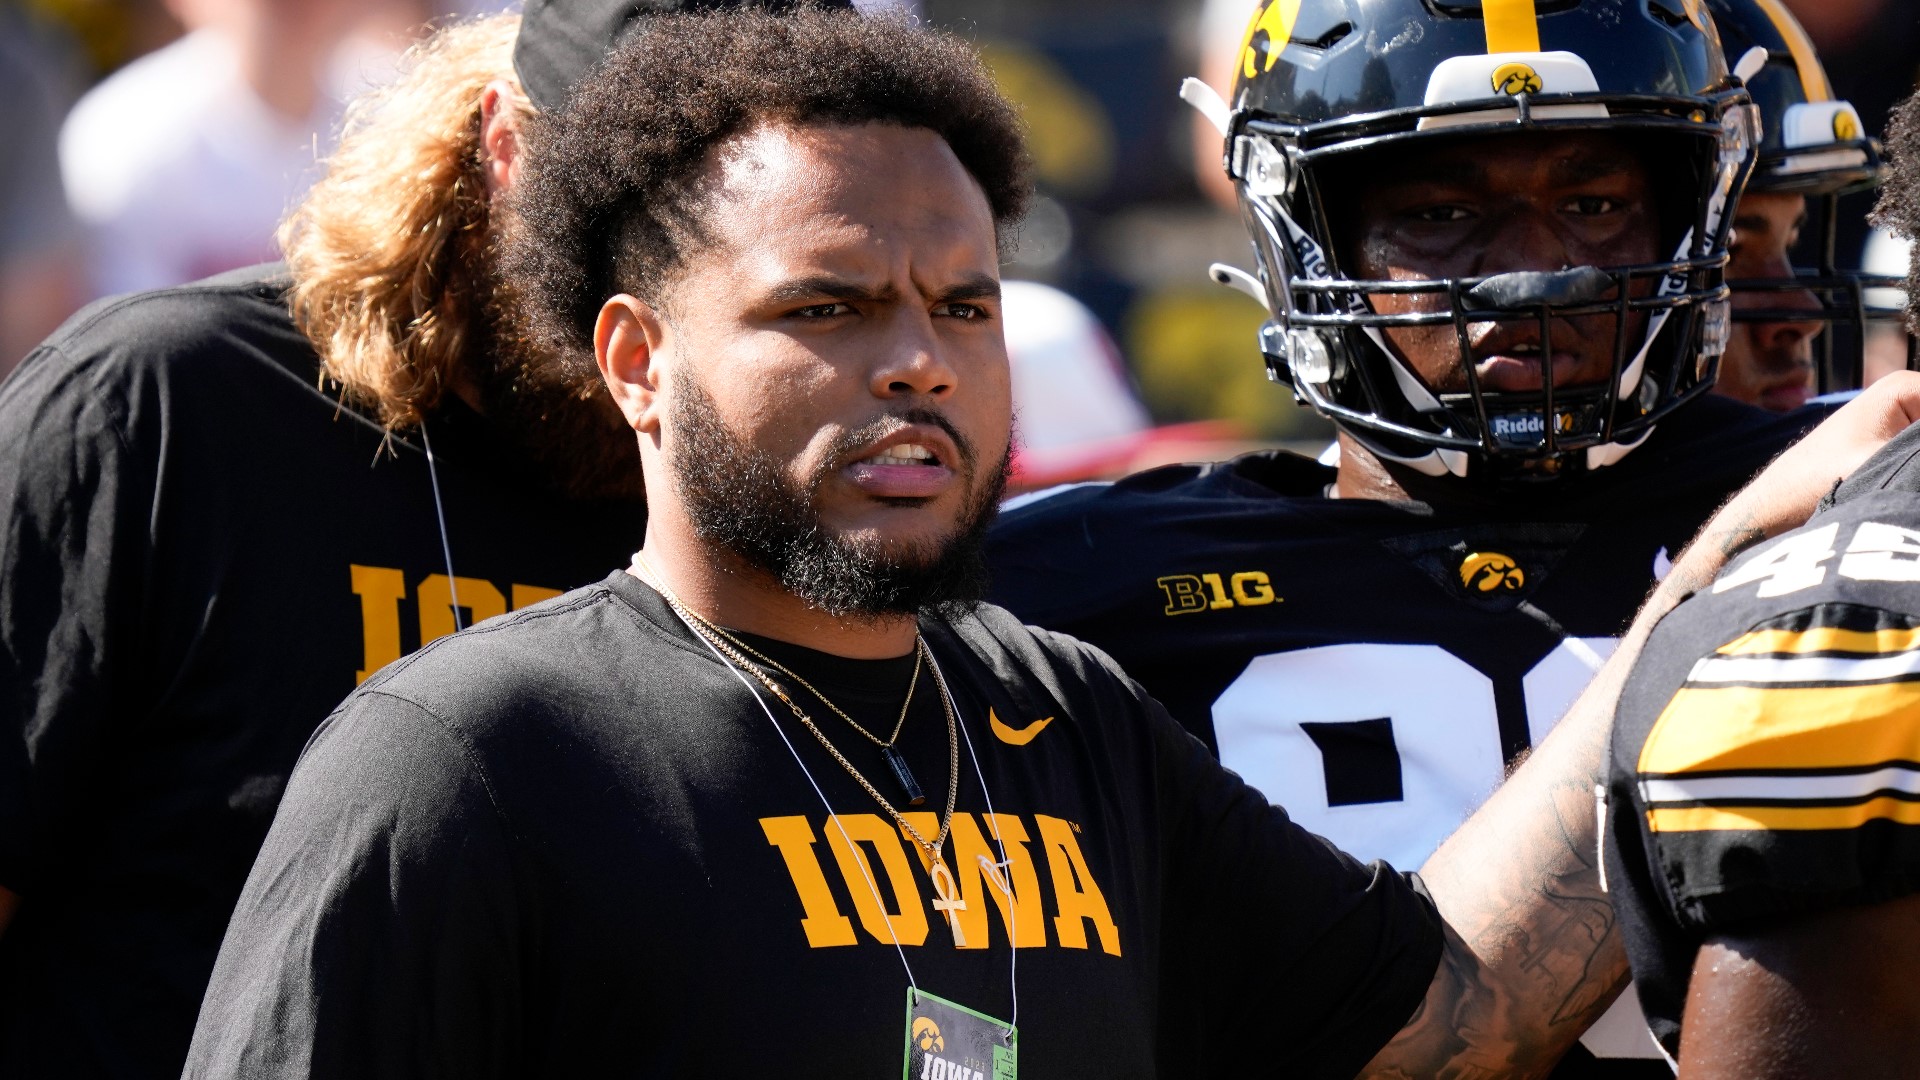 Iowa coach Kirk Ferentz has announced the NCAA has denied defensive lineman Noah Shannon’s appeal of his season-long suspension for sports wagering.